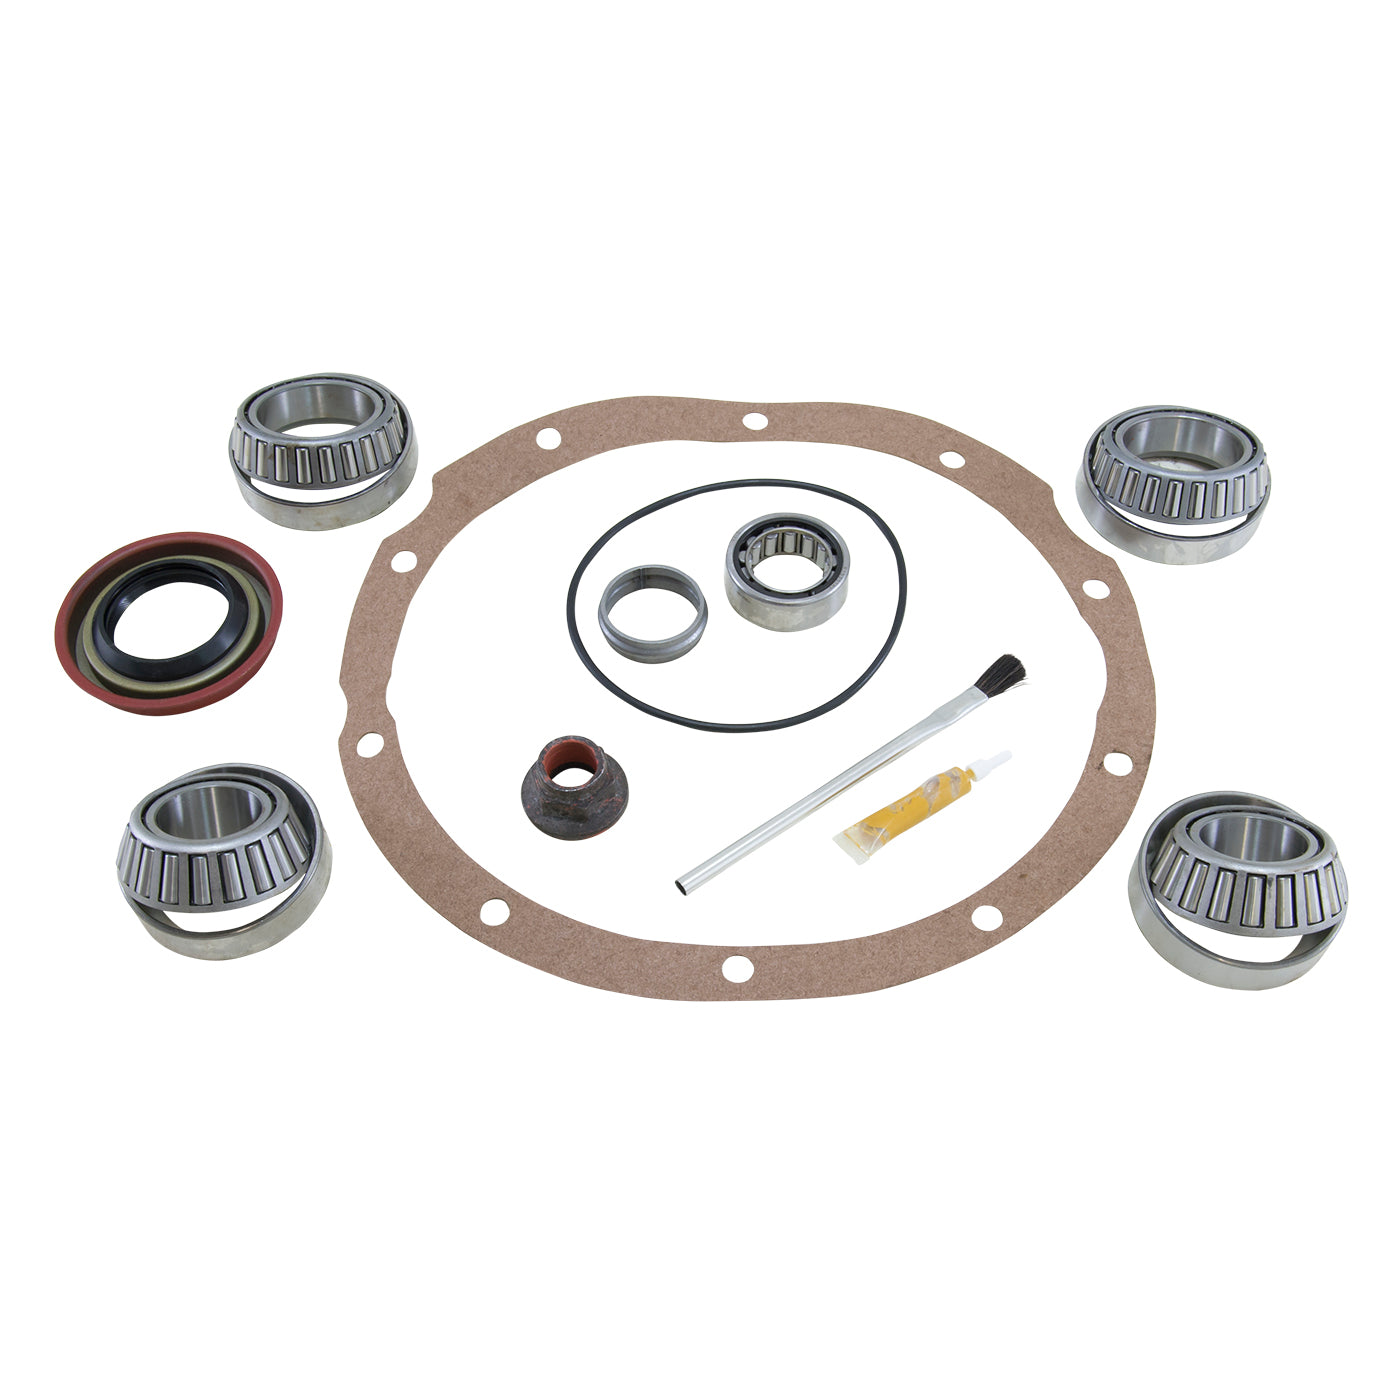 Yukon Gear bearing install kit for Ford 8" differential with aftermarket Posi BK F8-AG